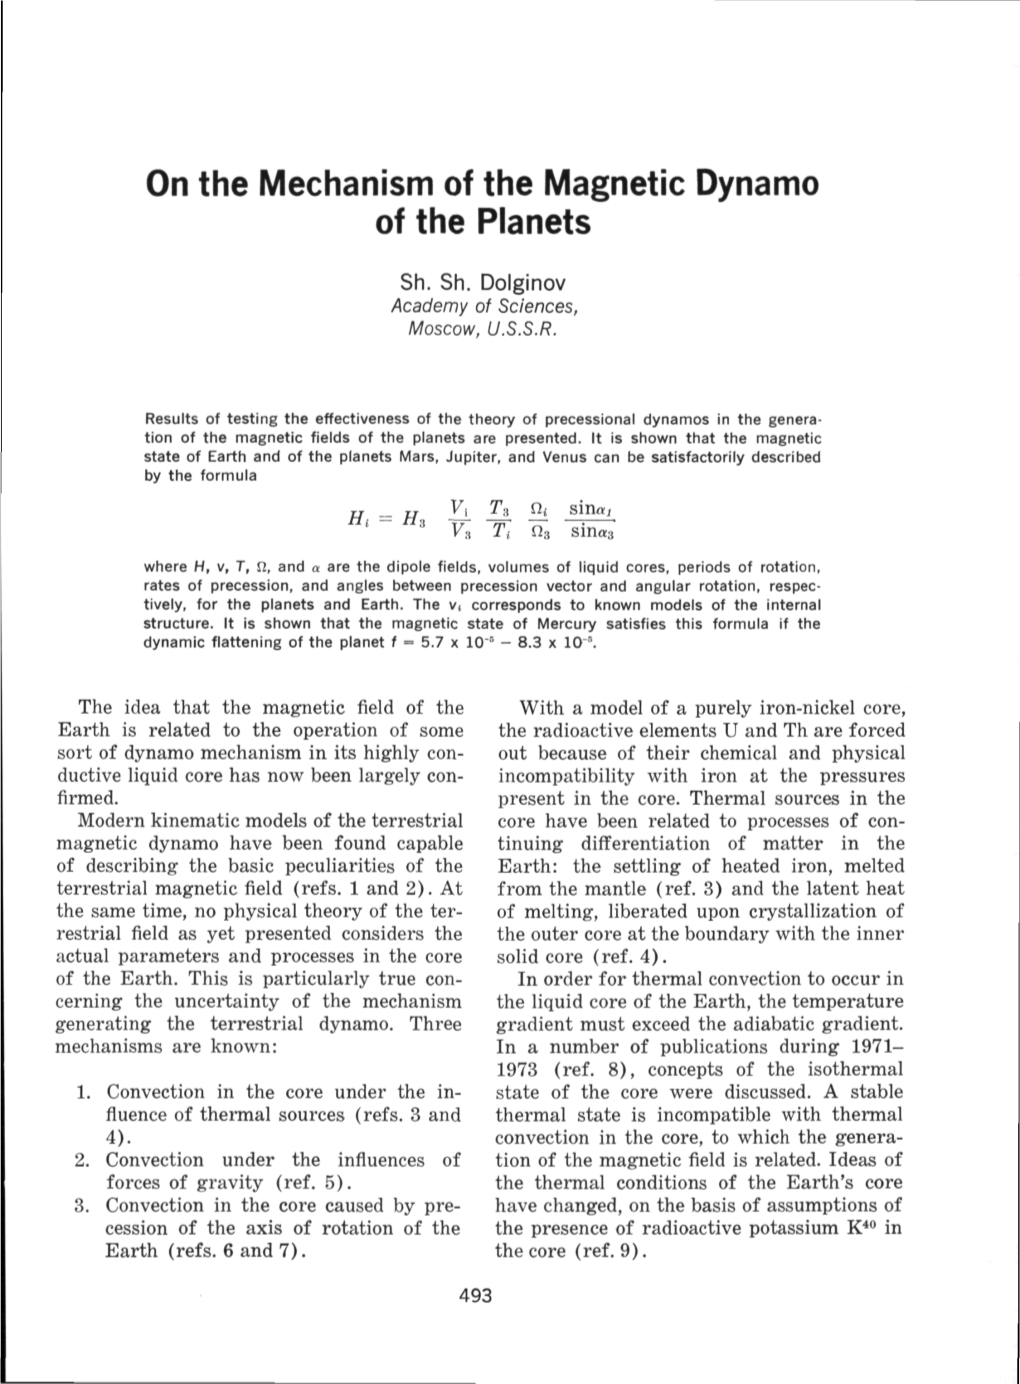 On the Mechanism of the Magnetic Dynamo of the Planets